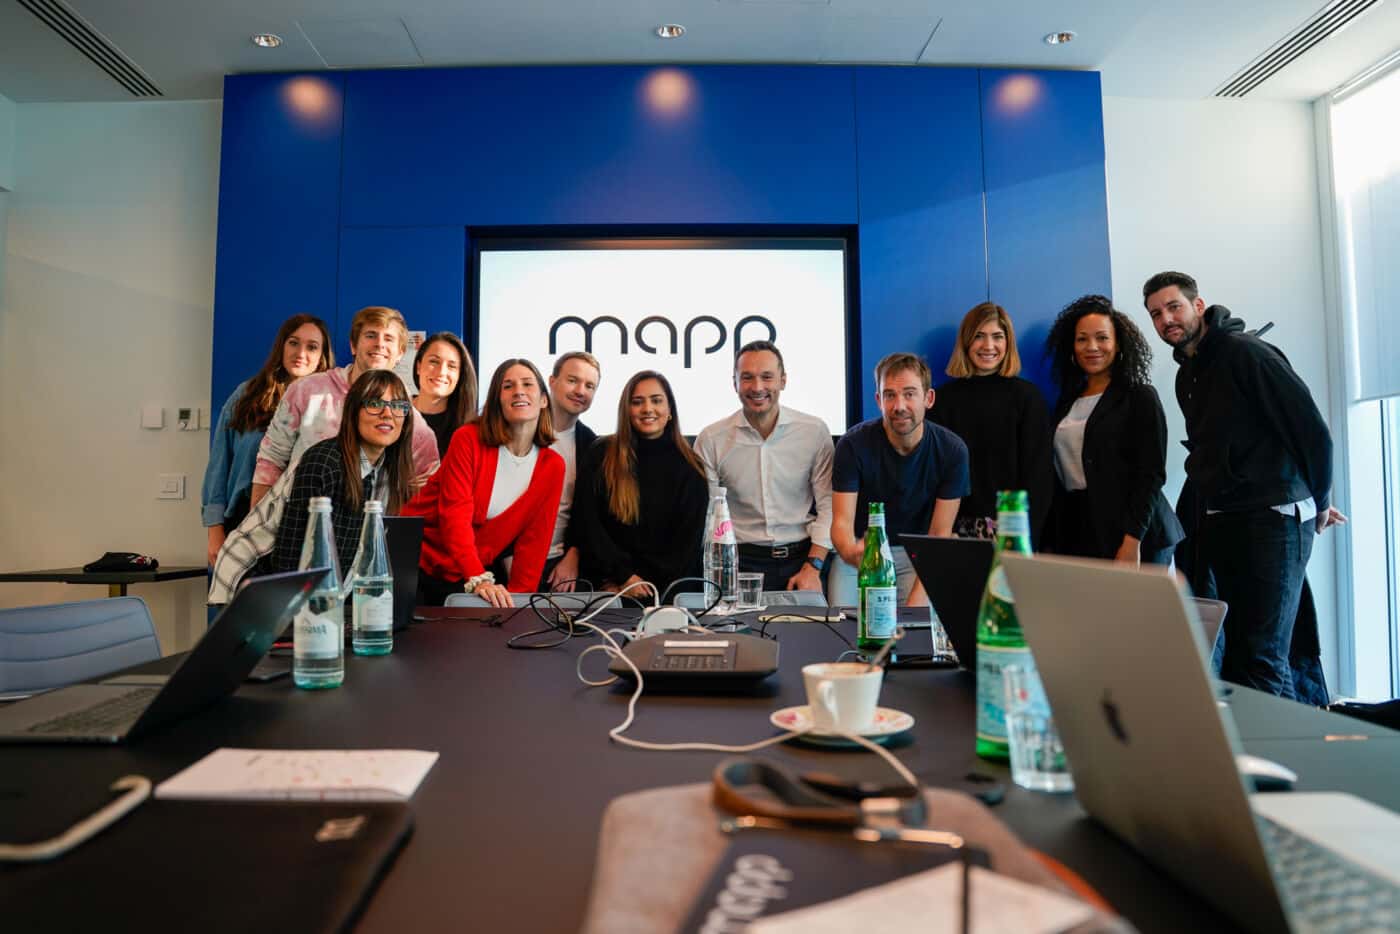 Mapp-Mappsters